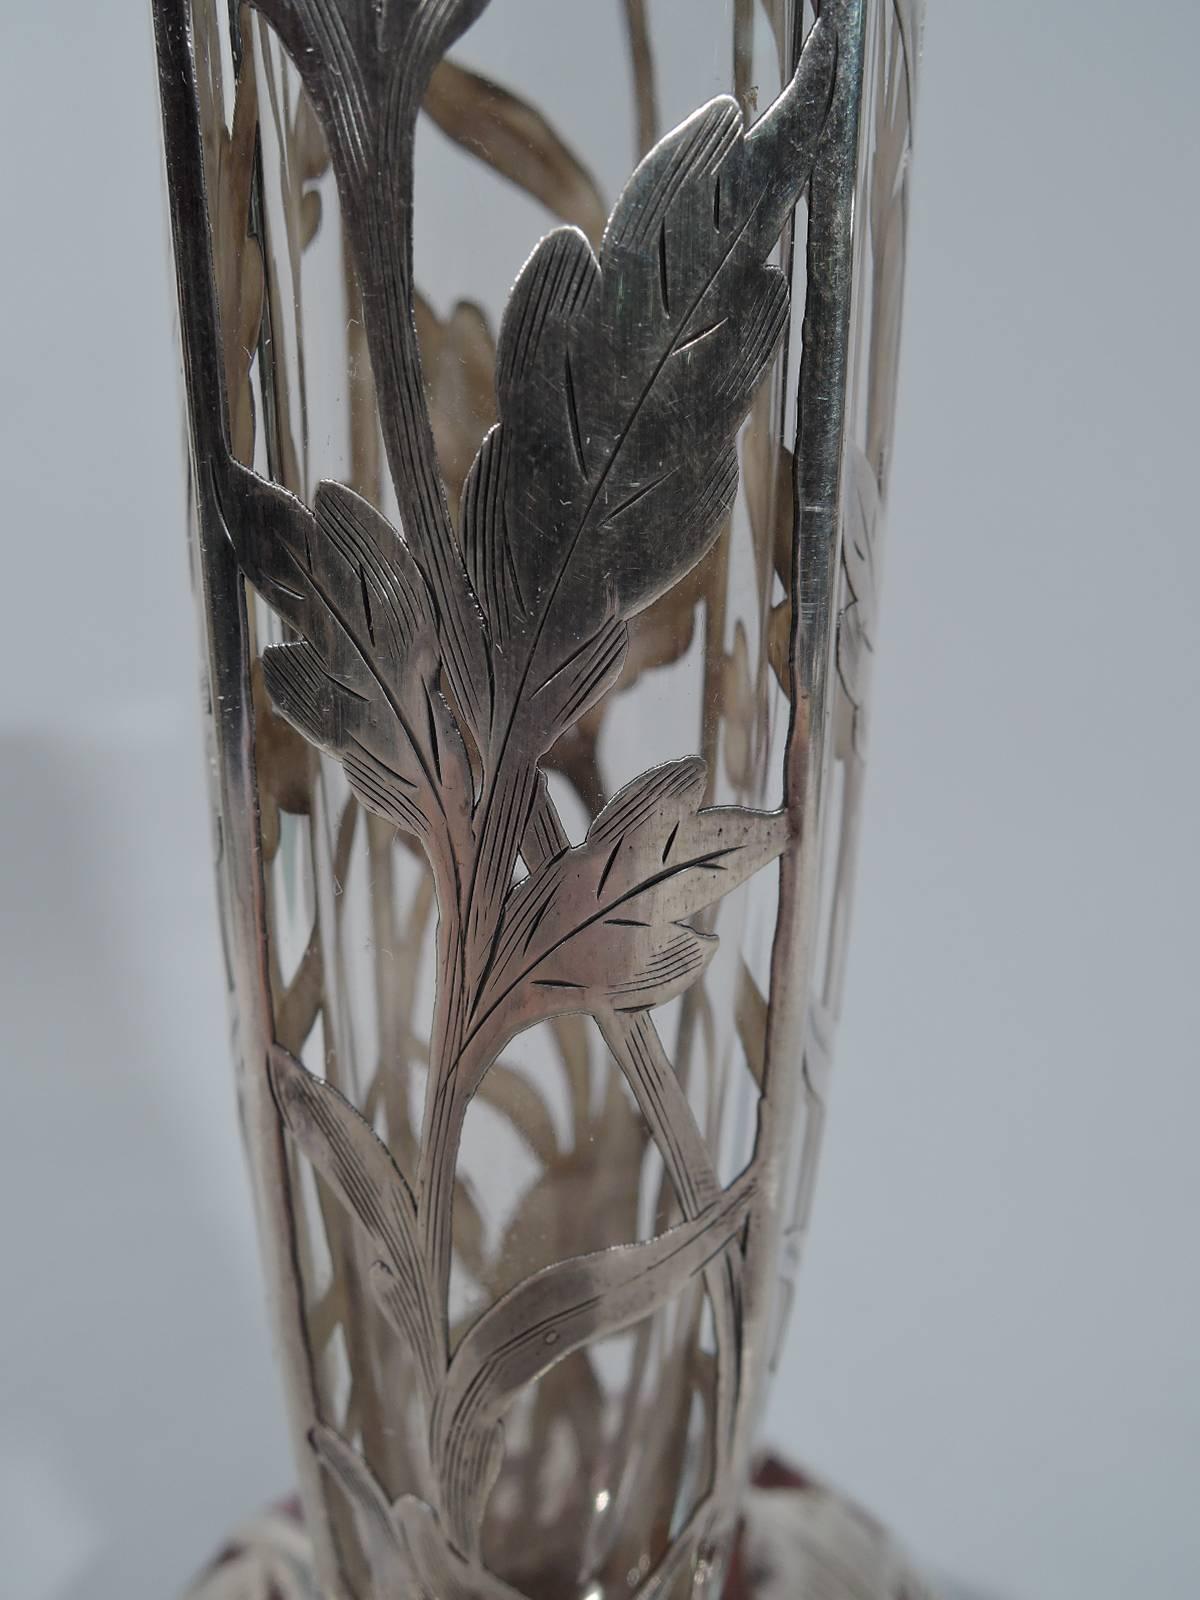 19th Century Unusual American Art Nouveau Clear and Cranberry Glass Vase with Silver Overlay